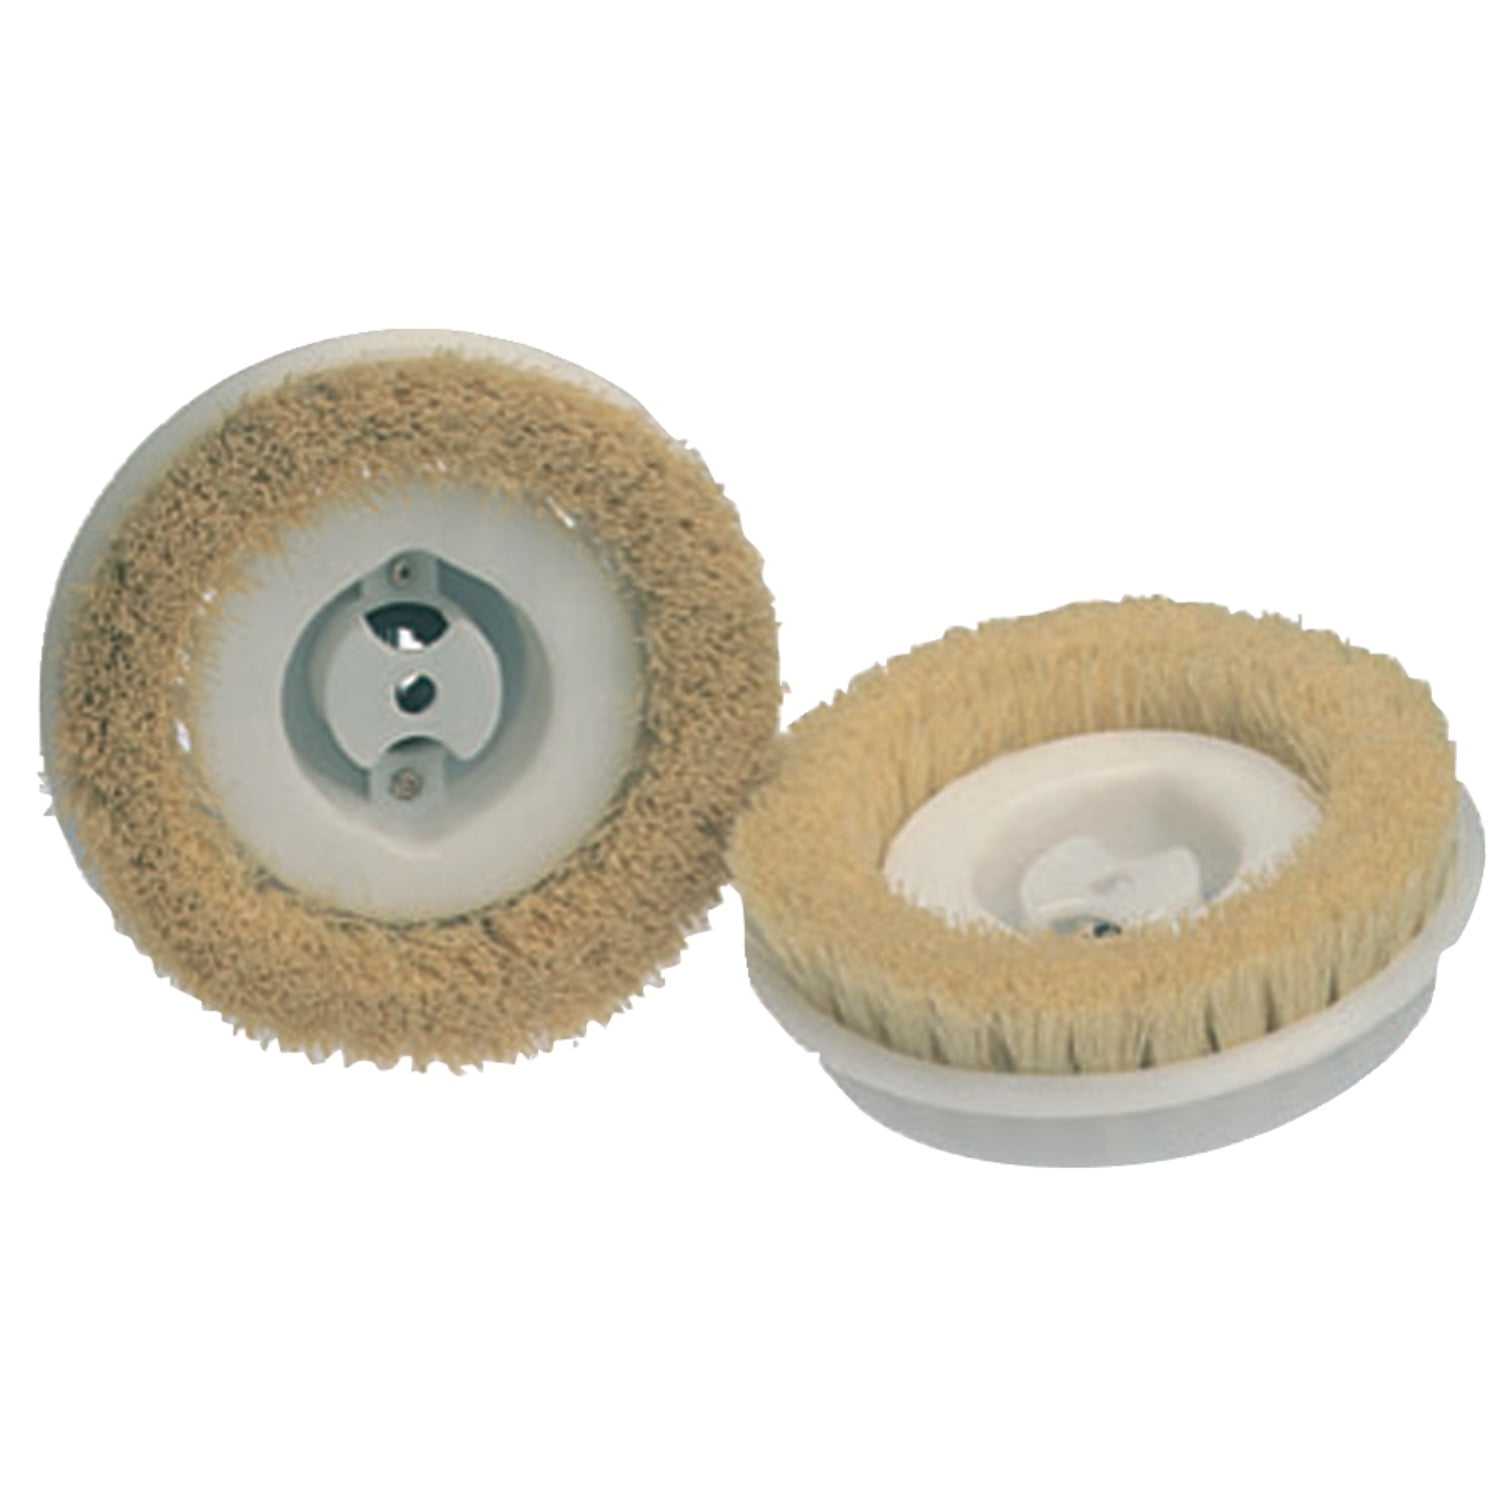 2 in a pack Scrub Brushes for Hard Floors Details about   Koblenz 45-0233-2 